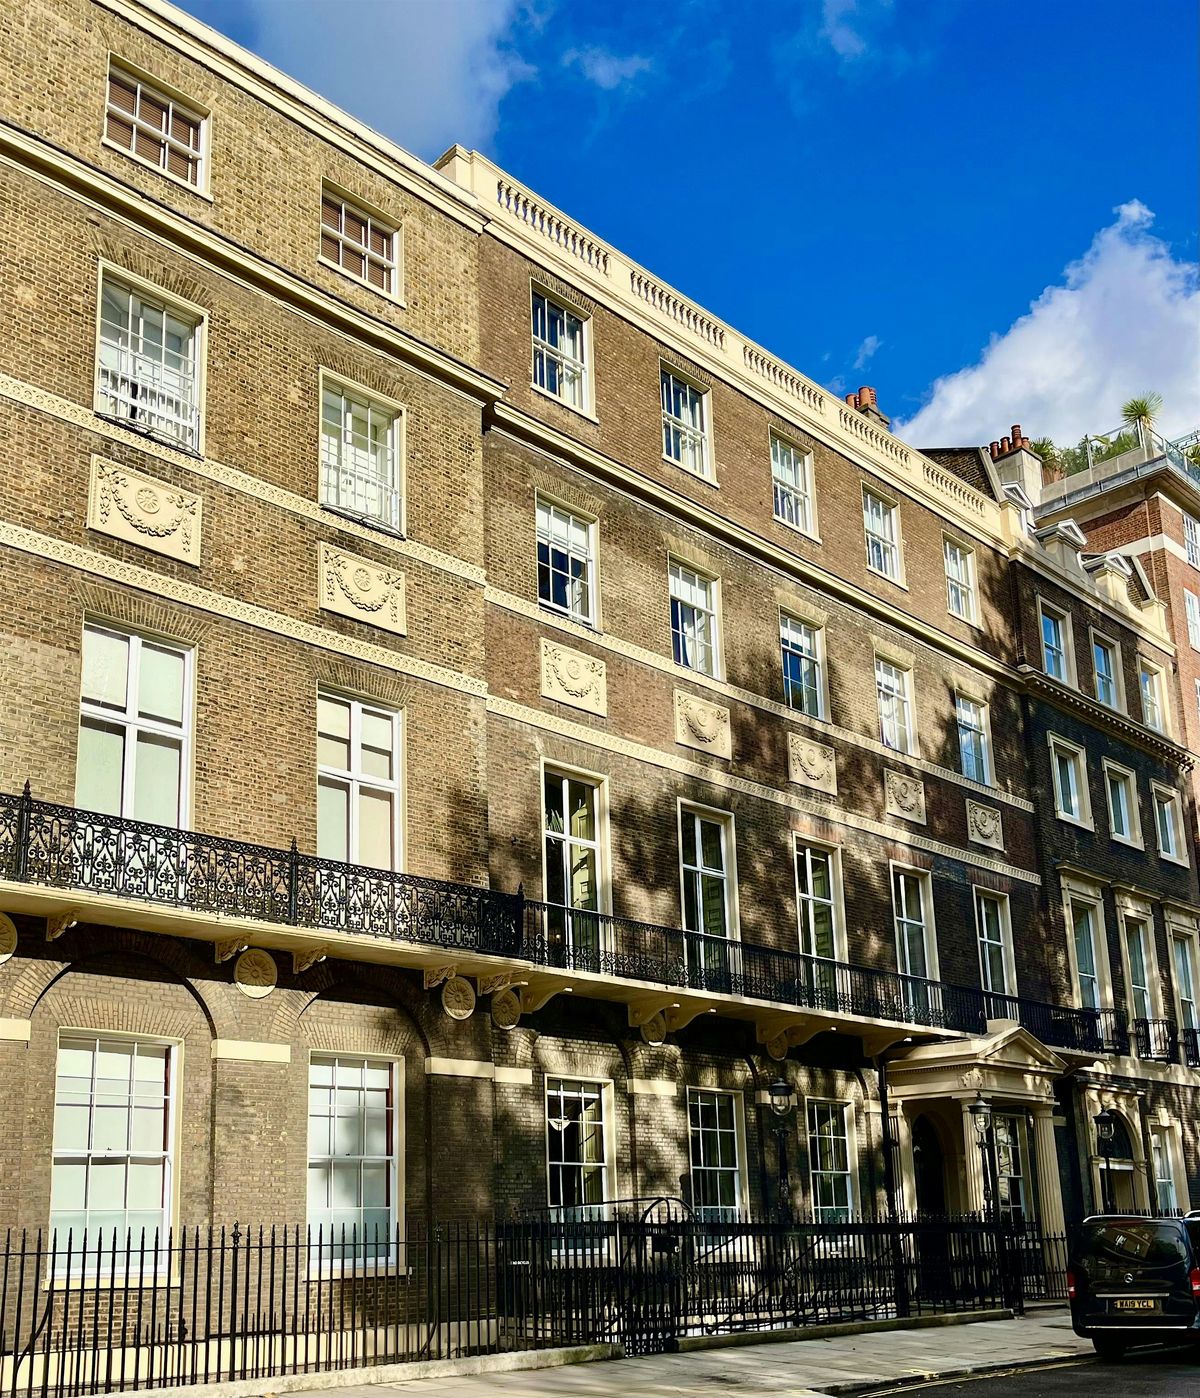 Walking Tour -  The Haves and Have-nots of Marylebone